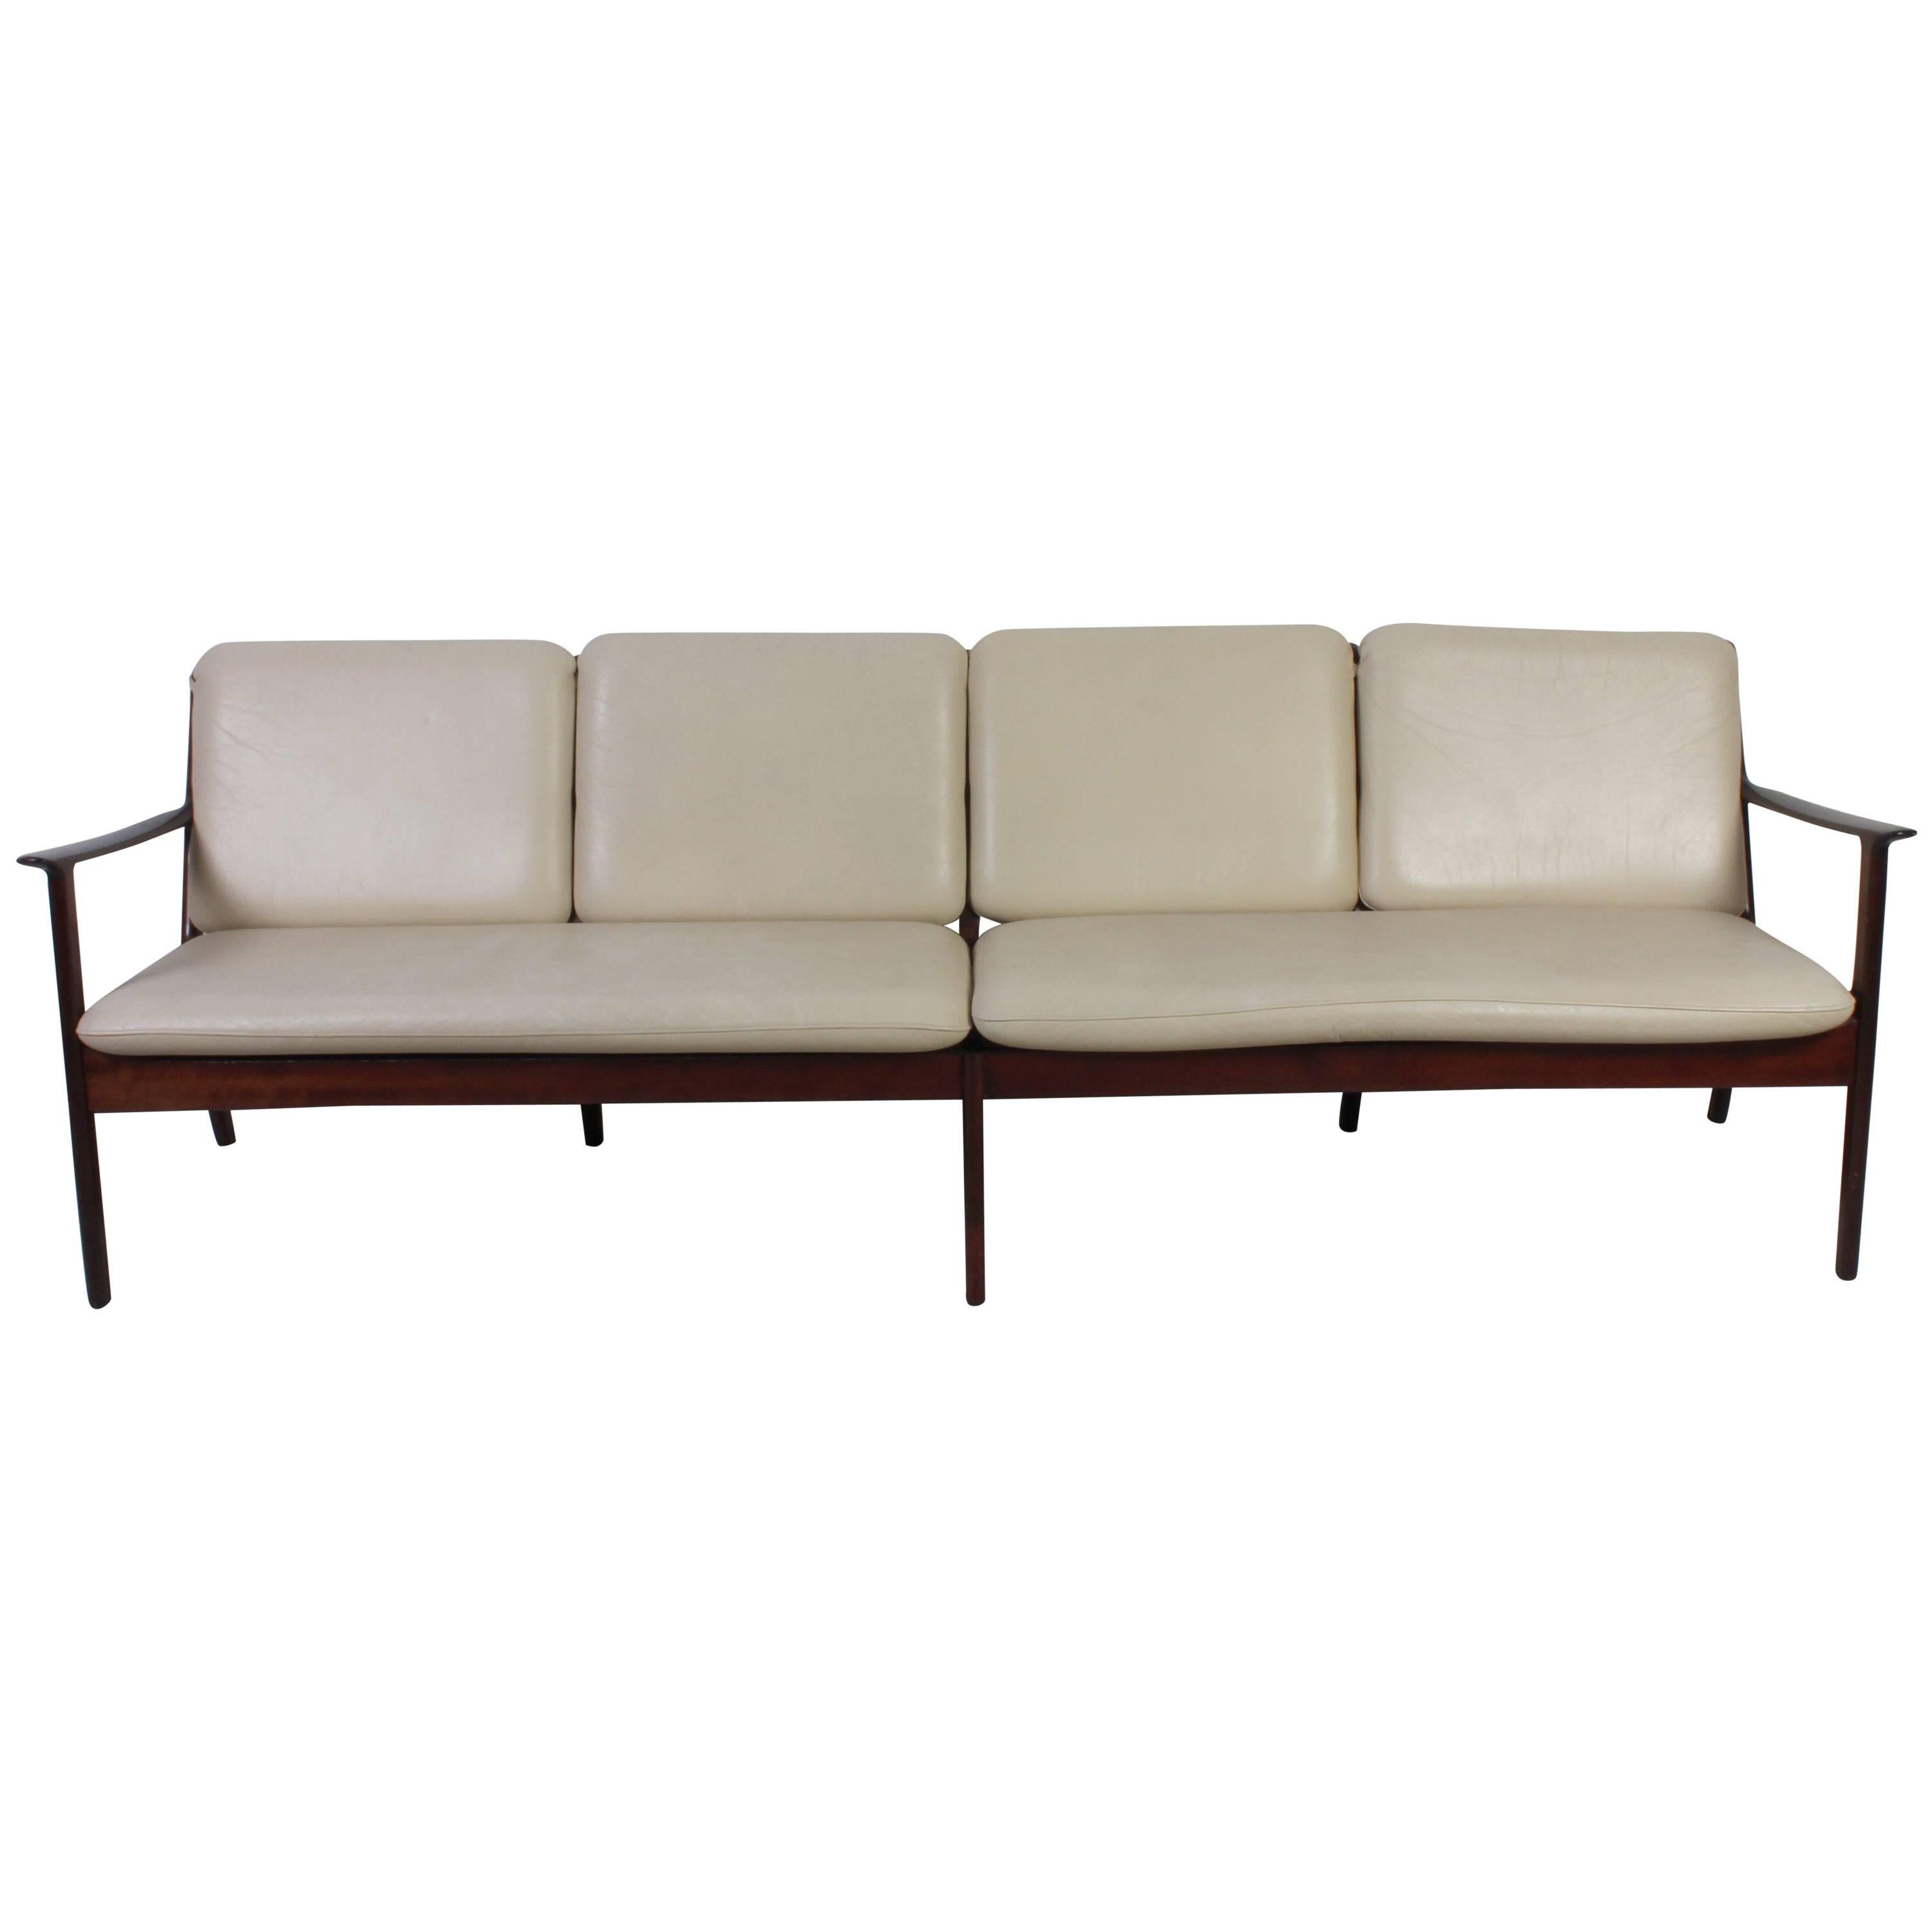 Ole Wanscher Mahogany PJ112 Four-Seat Sofa and Lounge Chair for Poul Jeppesen